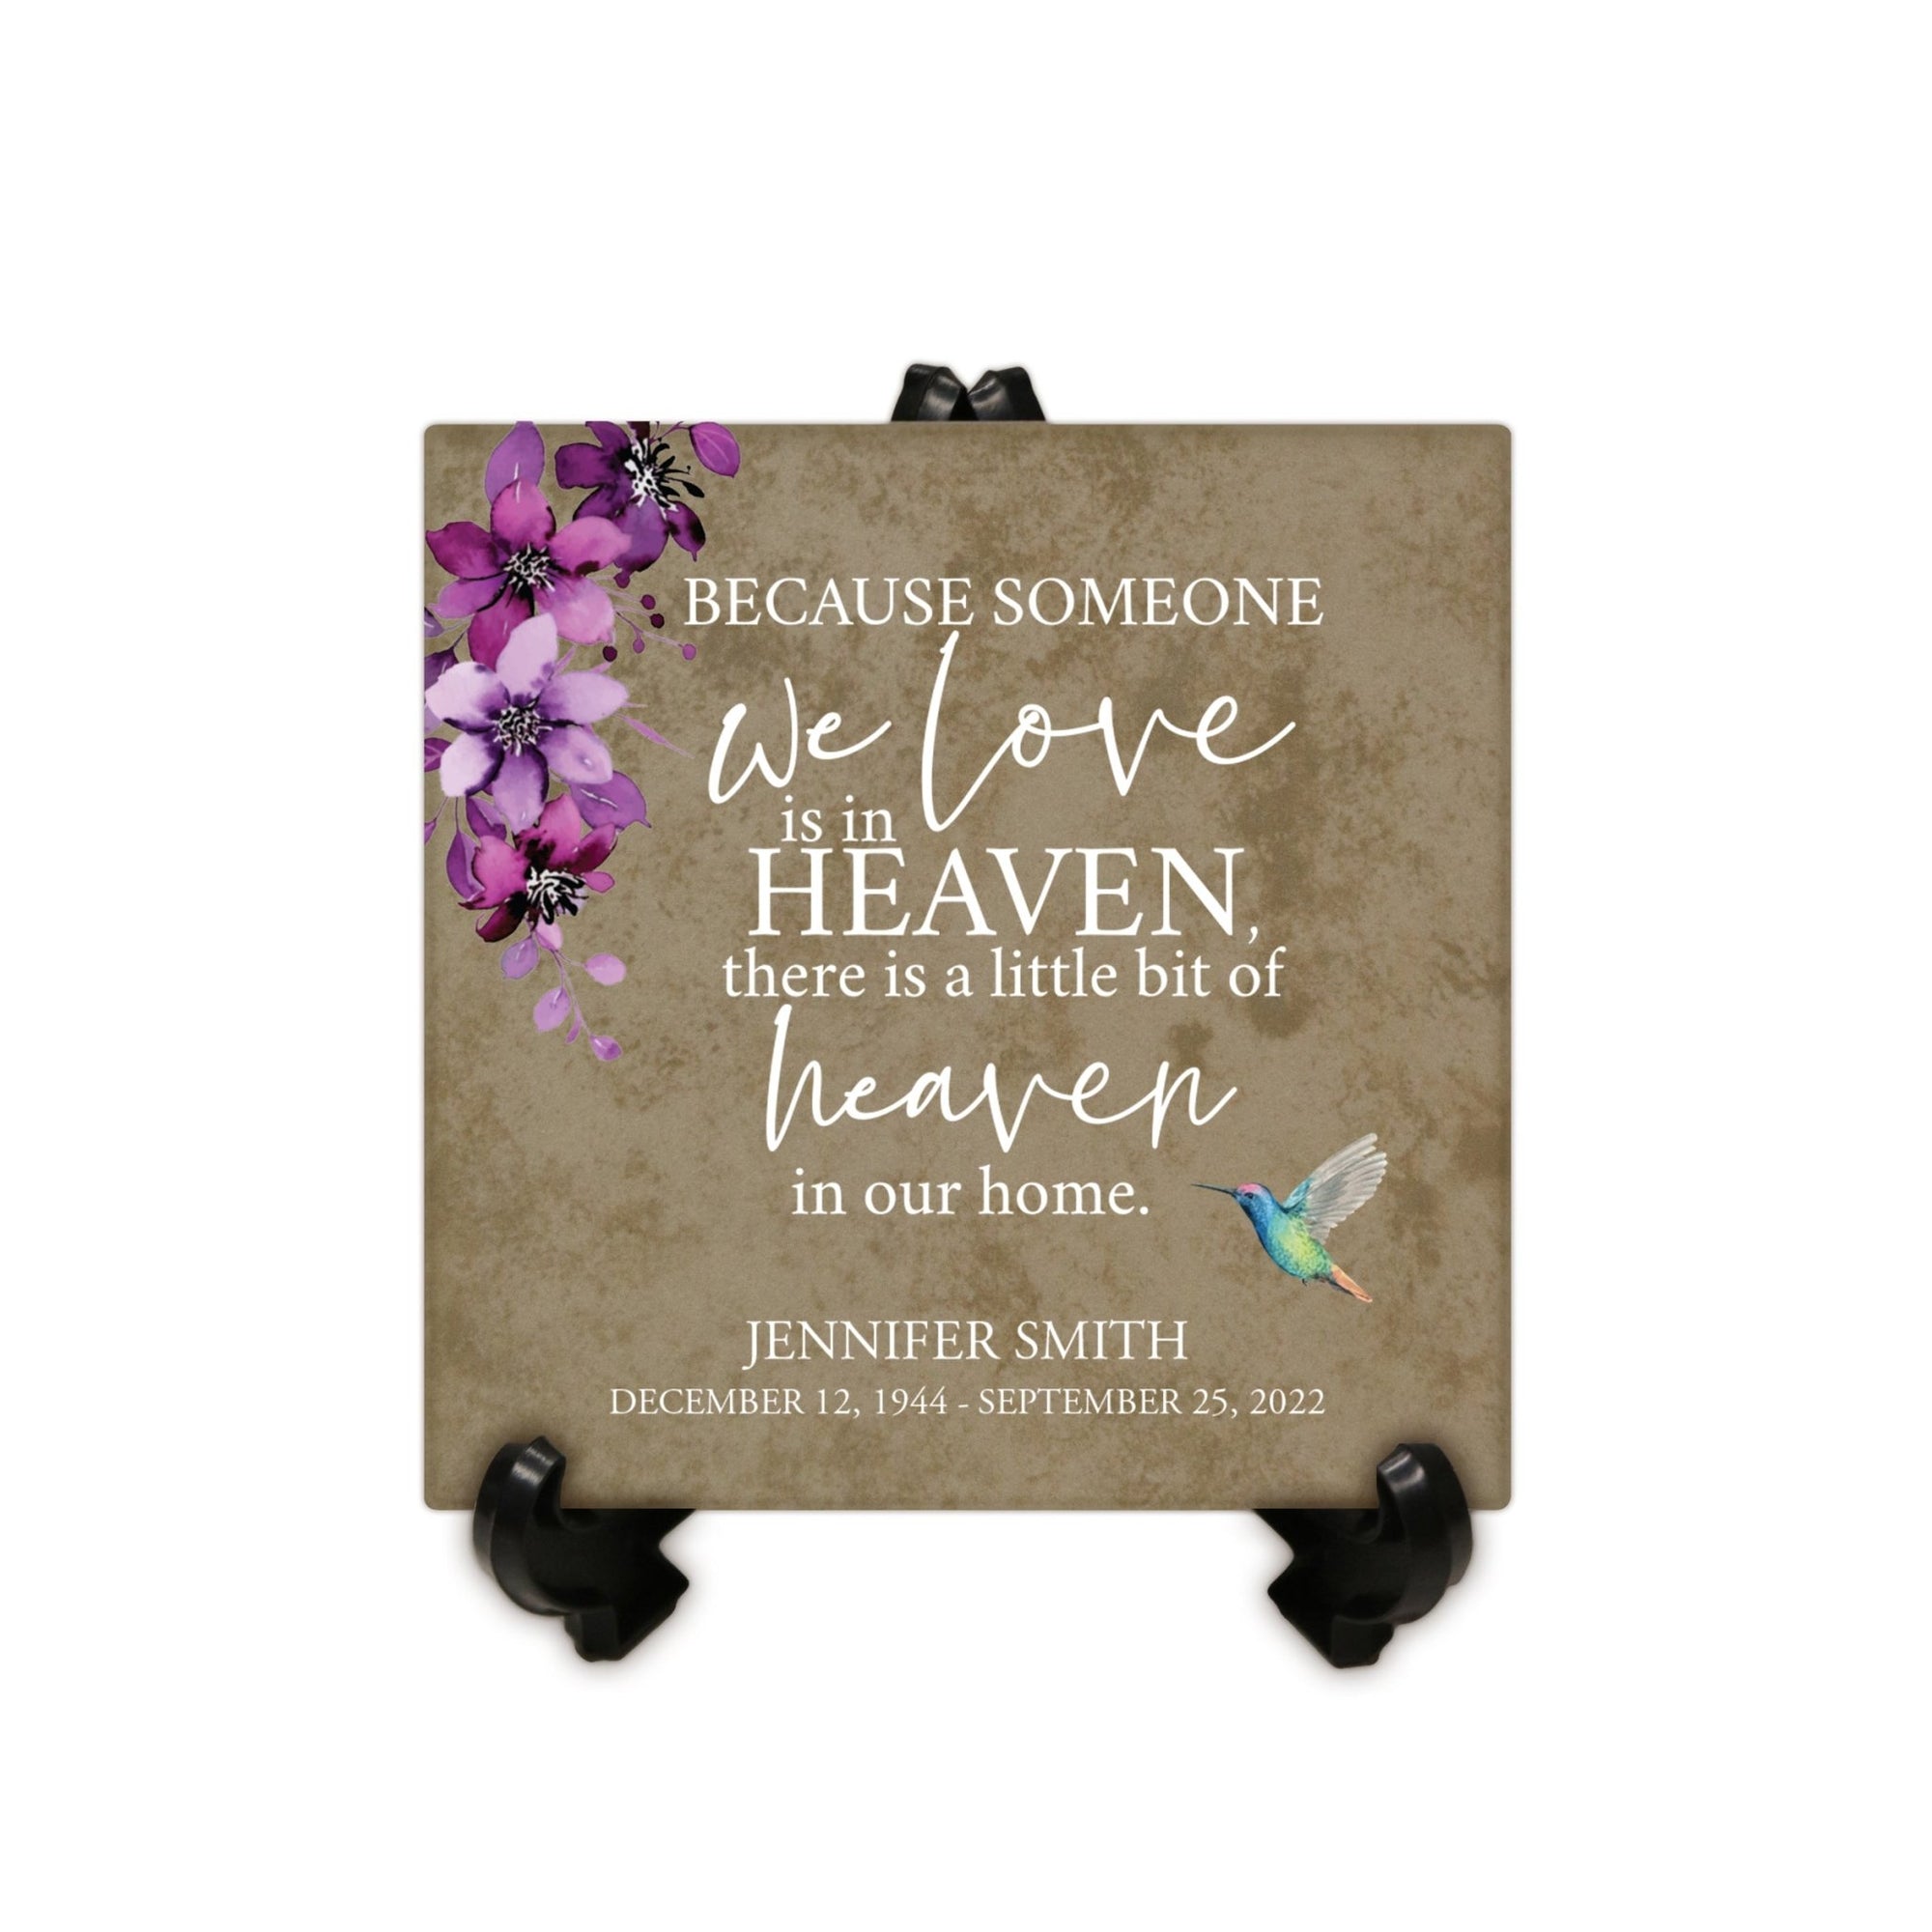 Personalized Memorial Ceramic Trivet with Stand for Home Decor - Because Someone We Love - LifeSong Milestones